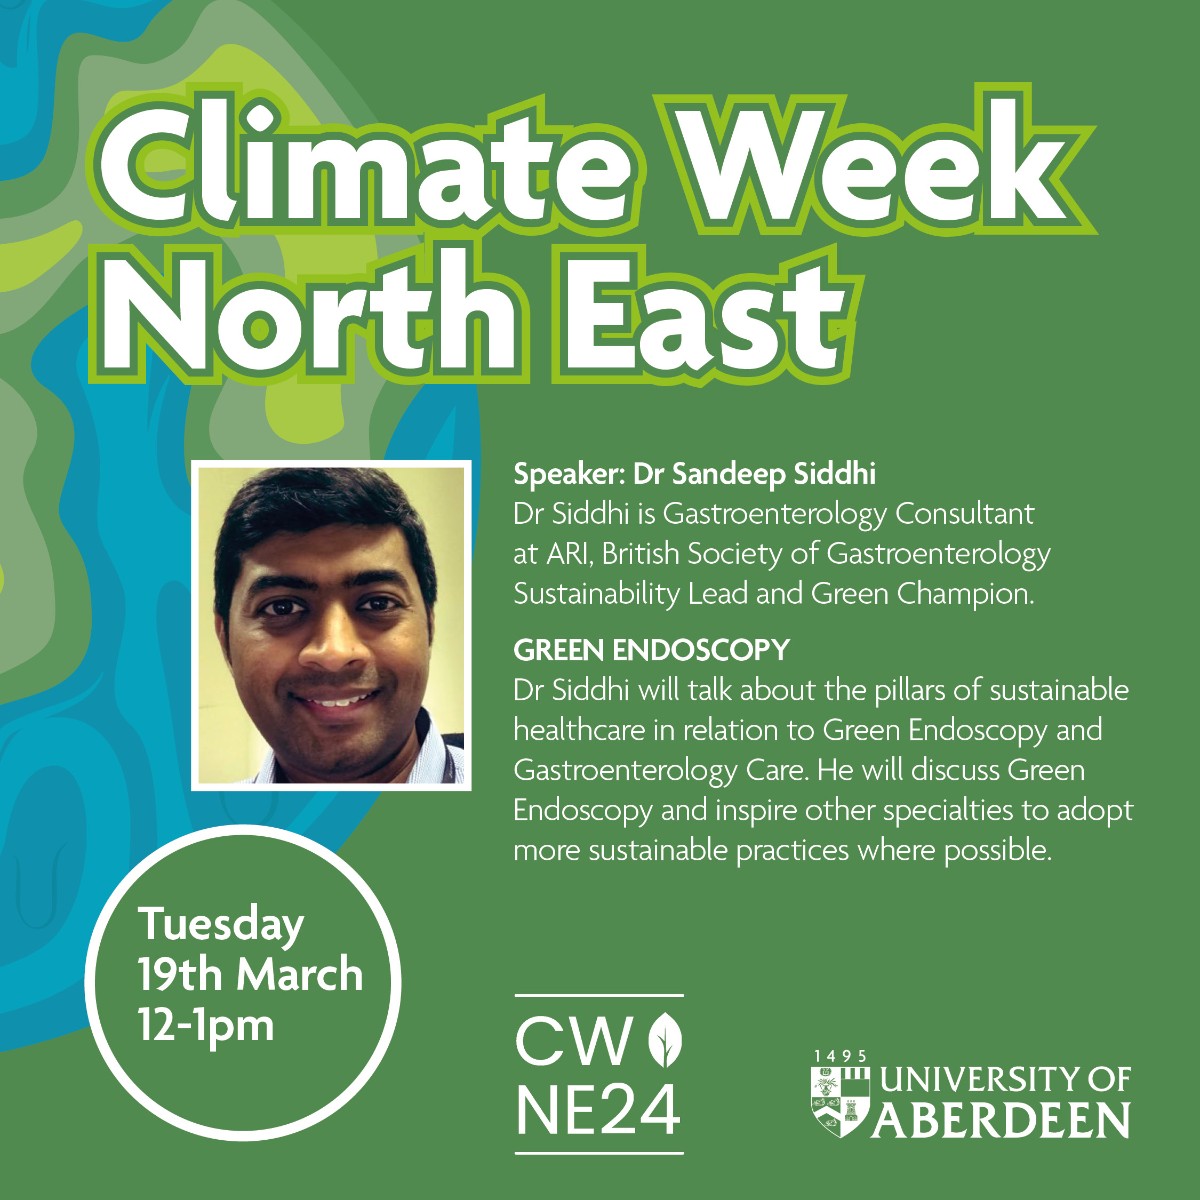 'Green Endoscopy' at 12pm (UK time) today. This talk will be hosted on Microsoft Teams and is open to all to attend. Register to attend for free here: abdn.io/wo #ClimateWeekNorthEast #CWNE24 @NescanHub @NHSGrampian